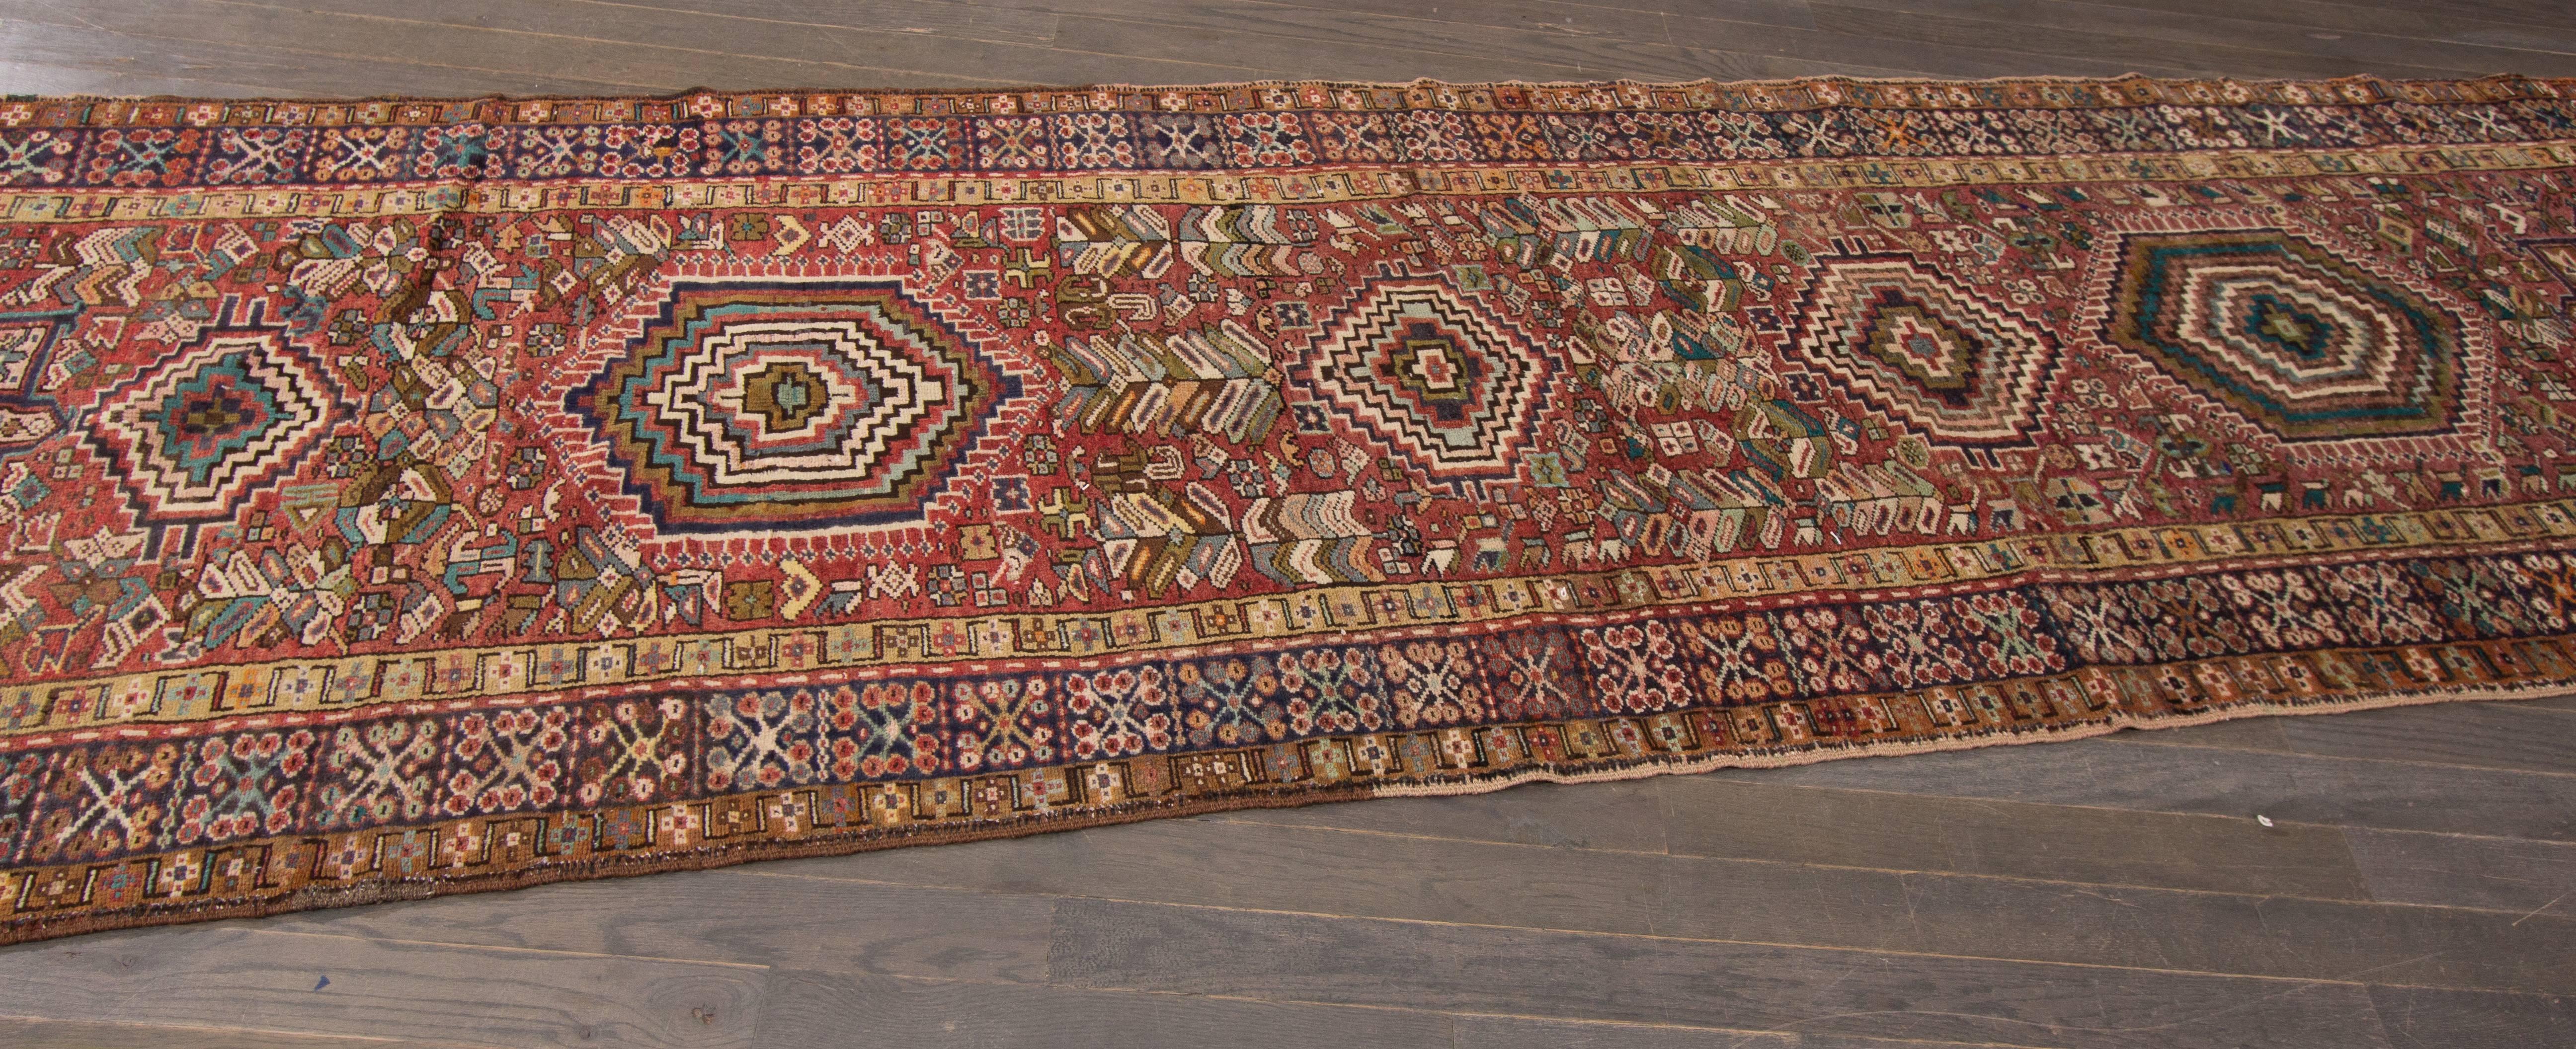 Heriz carpets are beloved for their versatility. Their geometry complements modern furnishings and their warm colors and artistic depth enhance antiques of all kinds. This 20th century Heriz runner features seven beautiful stylized geometric